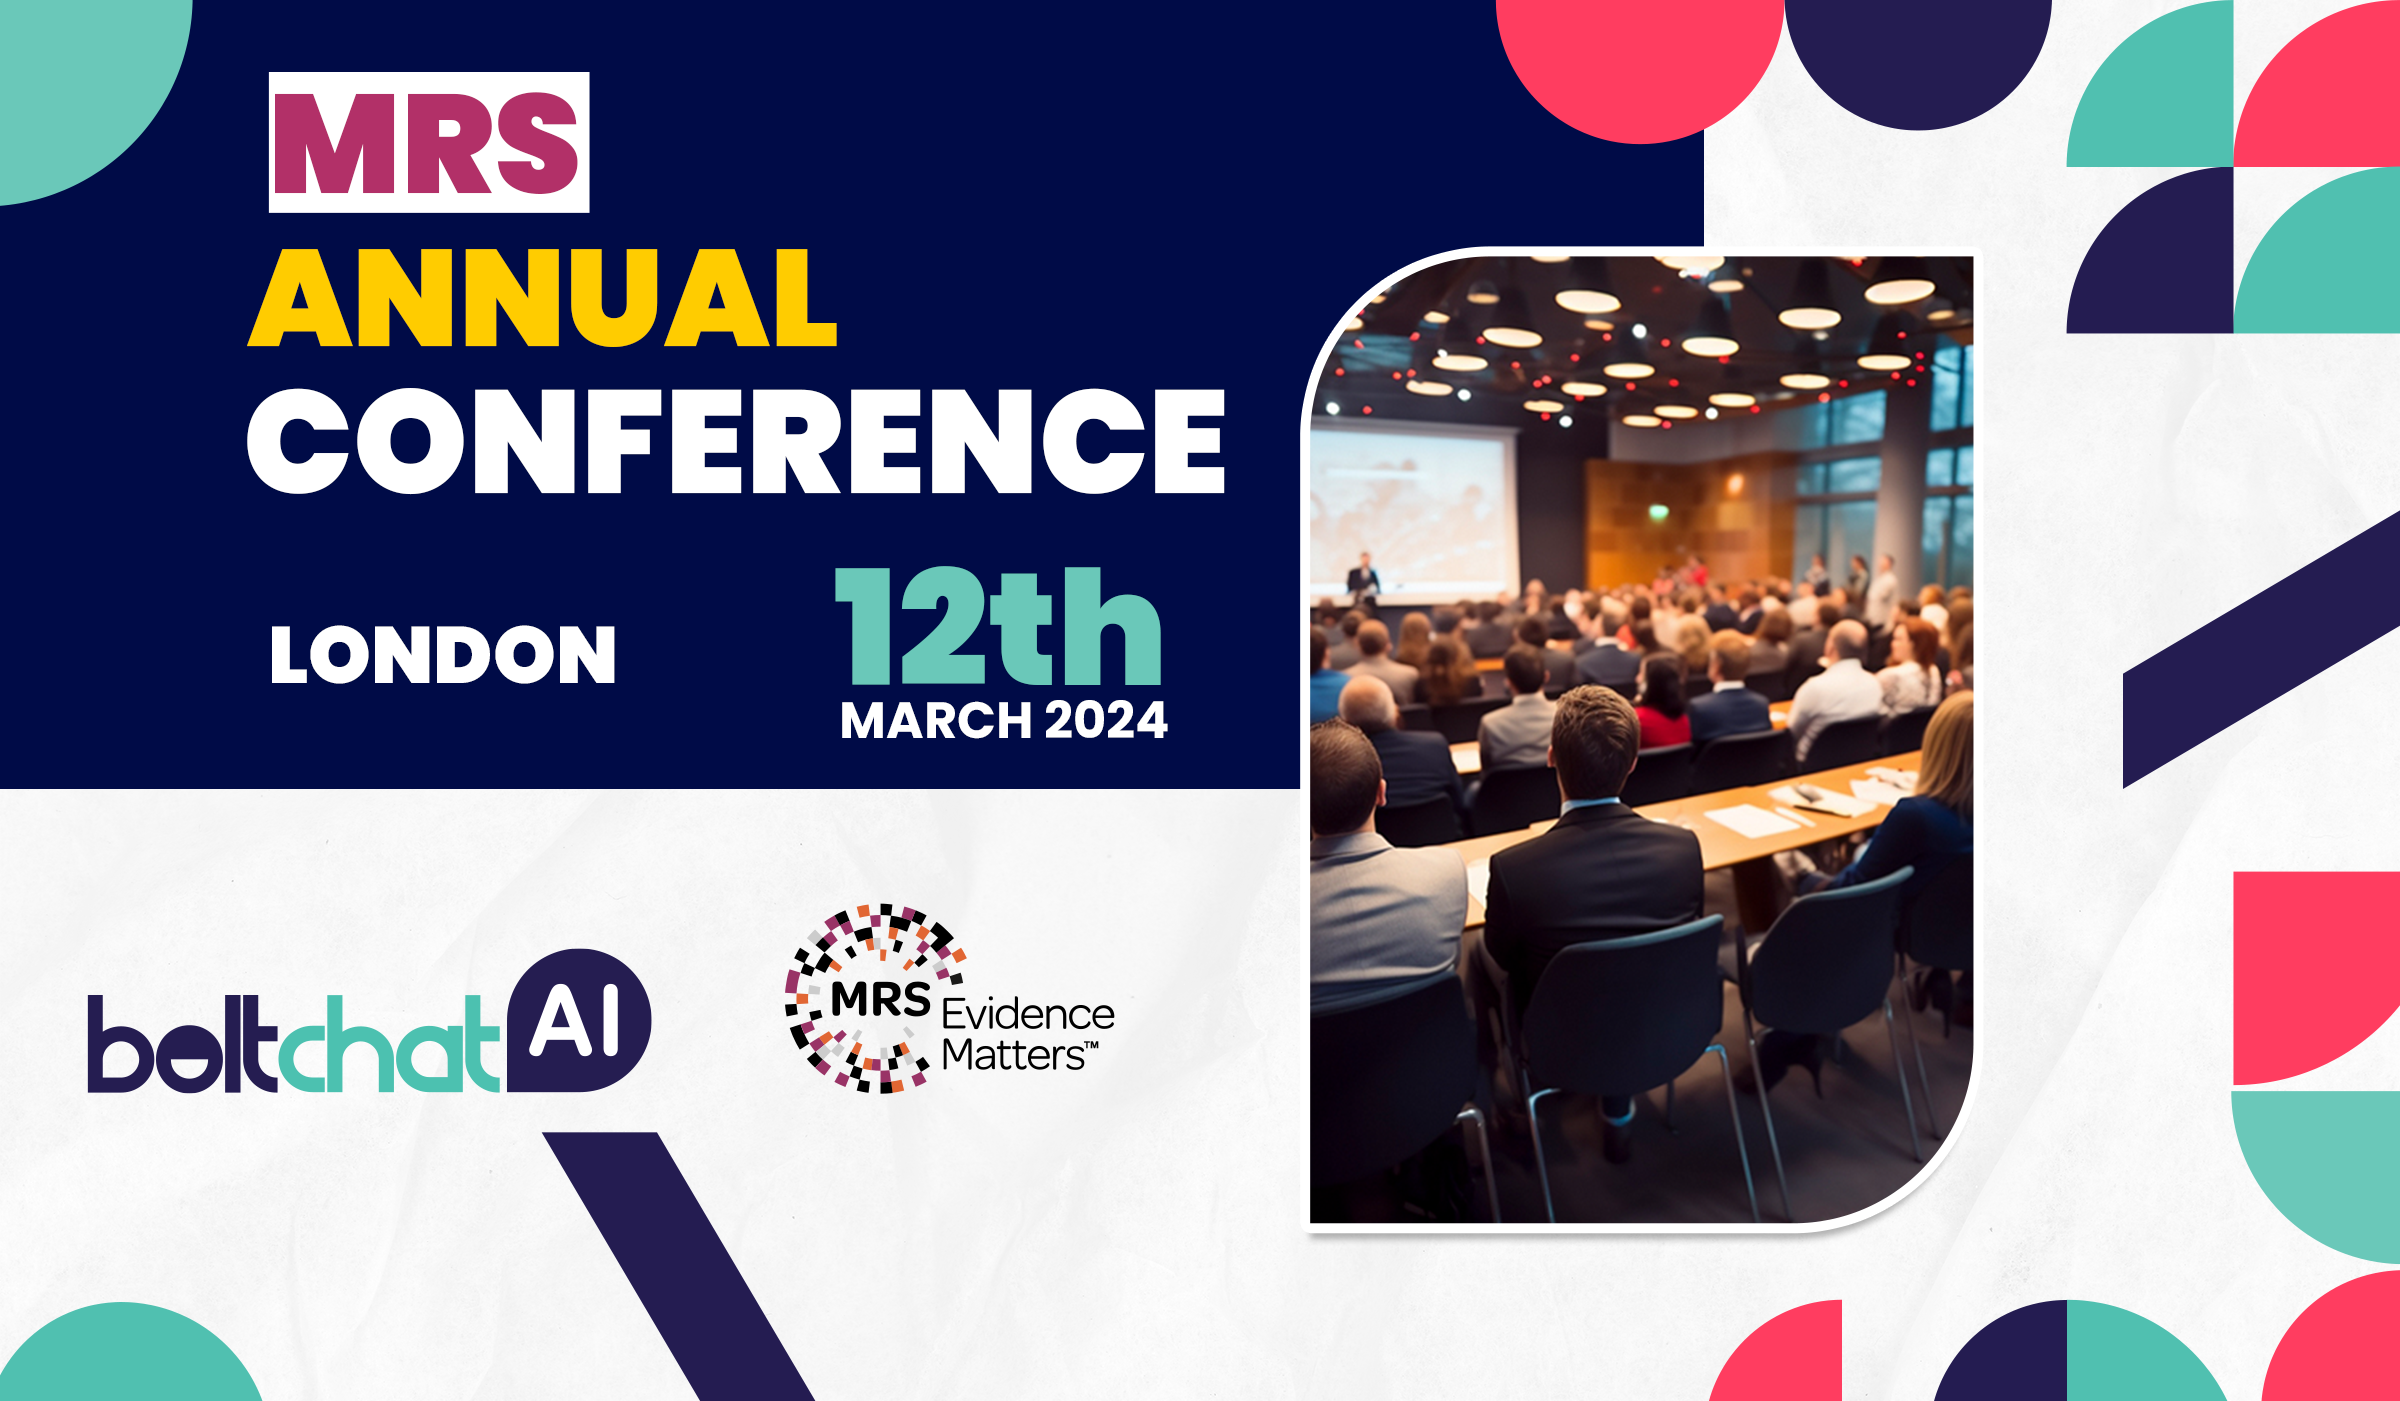 Events graphic for BoltChatAI to announce the MRS Annual Conference